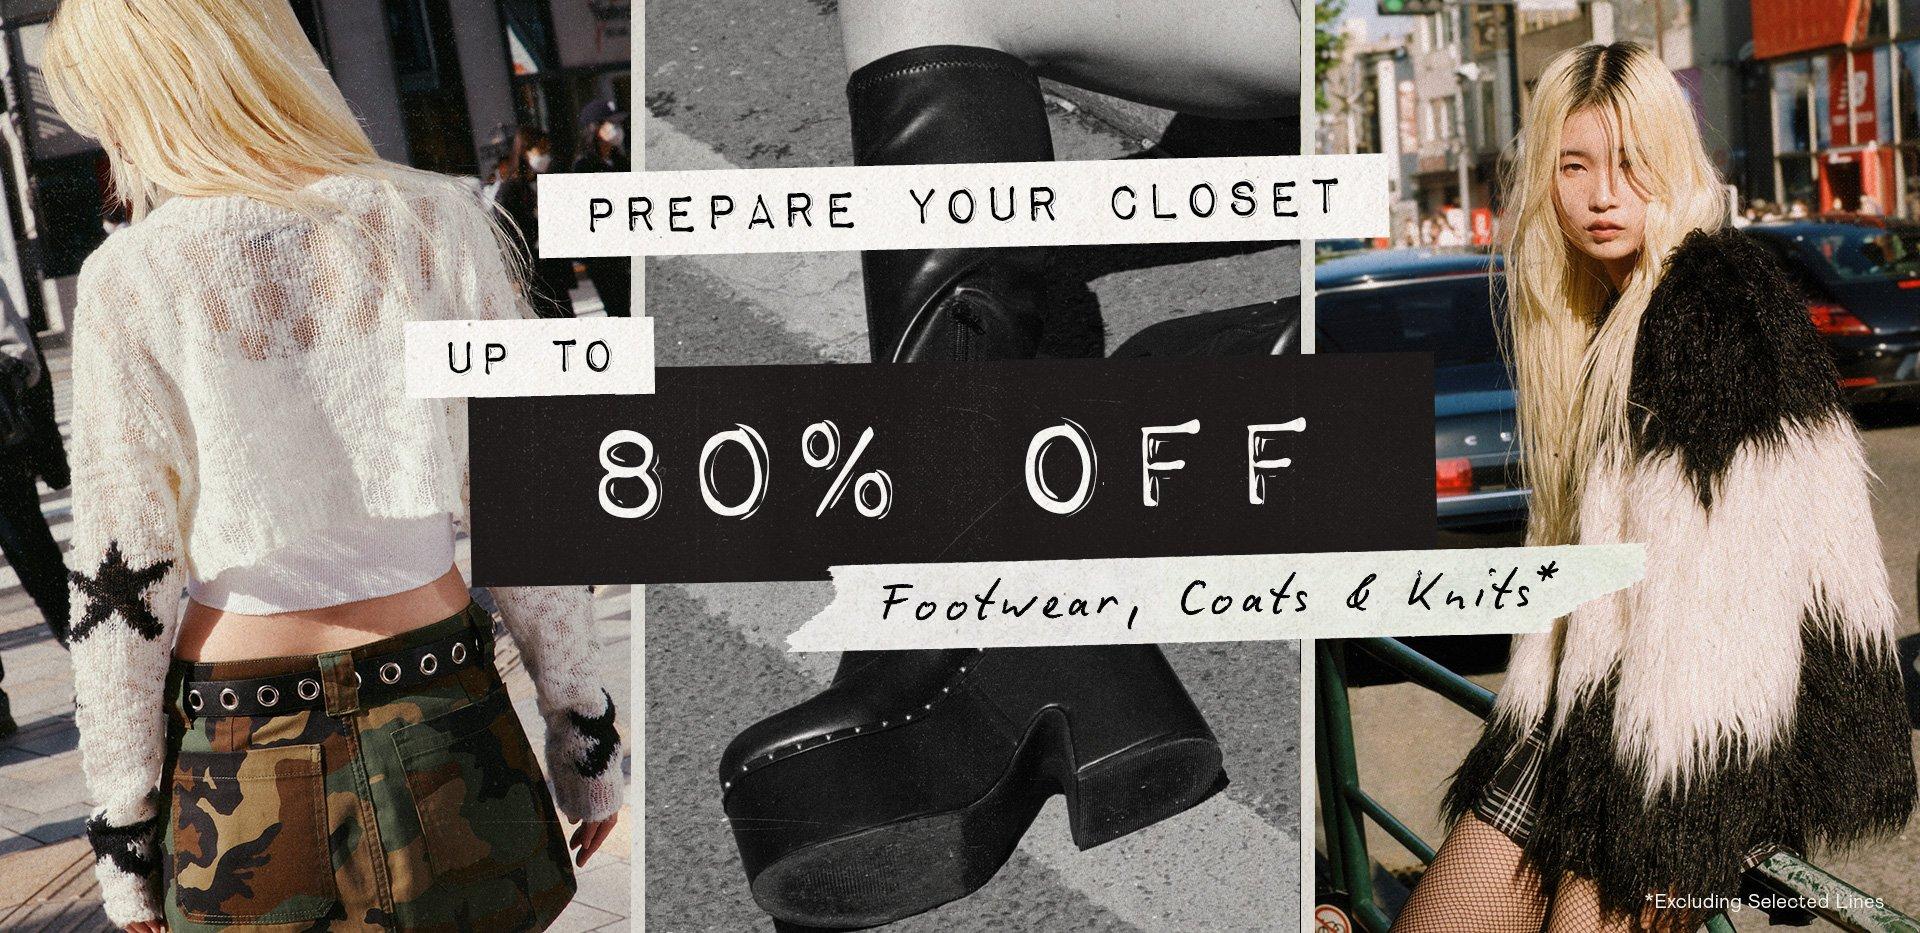 Up to 80% OFF Coats, Knits & Footwear*